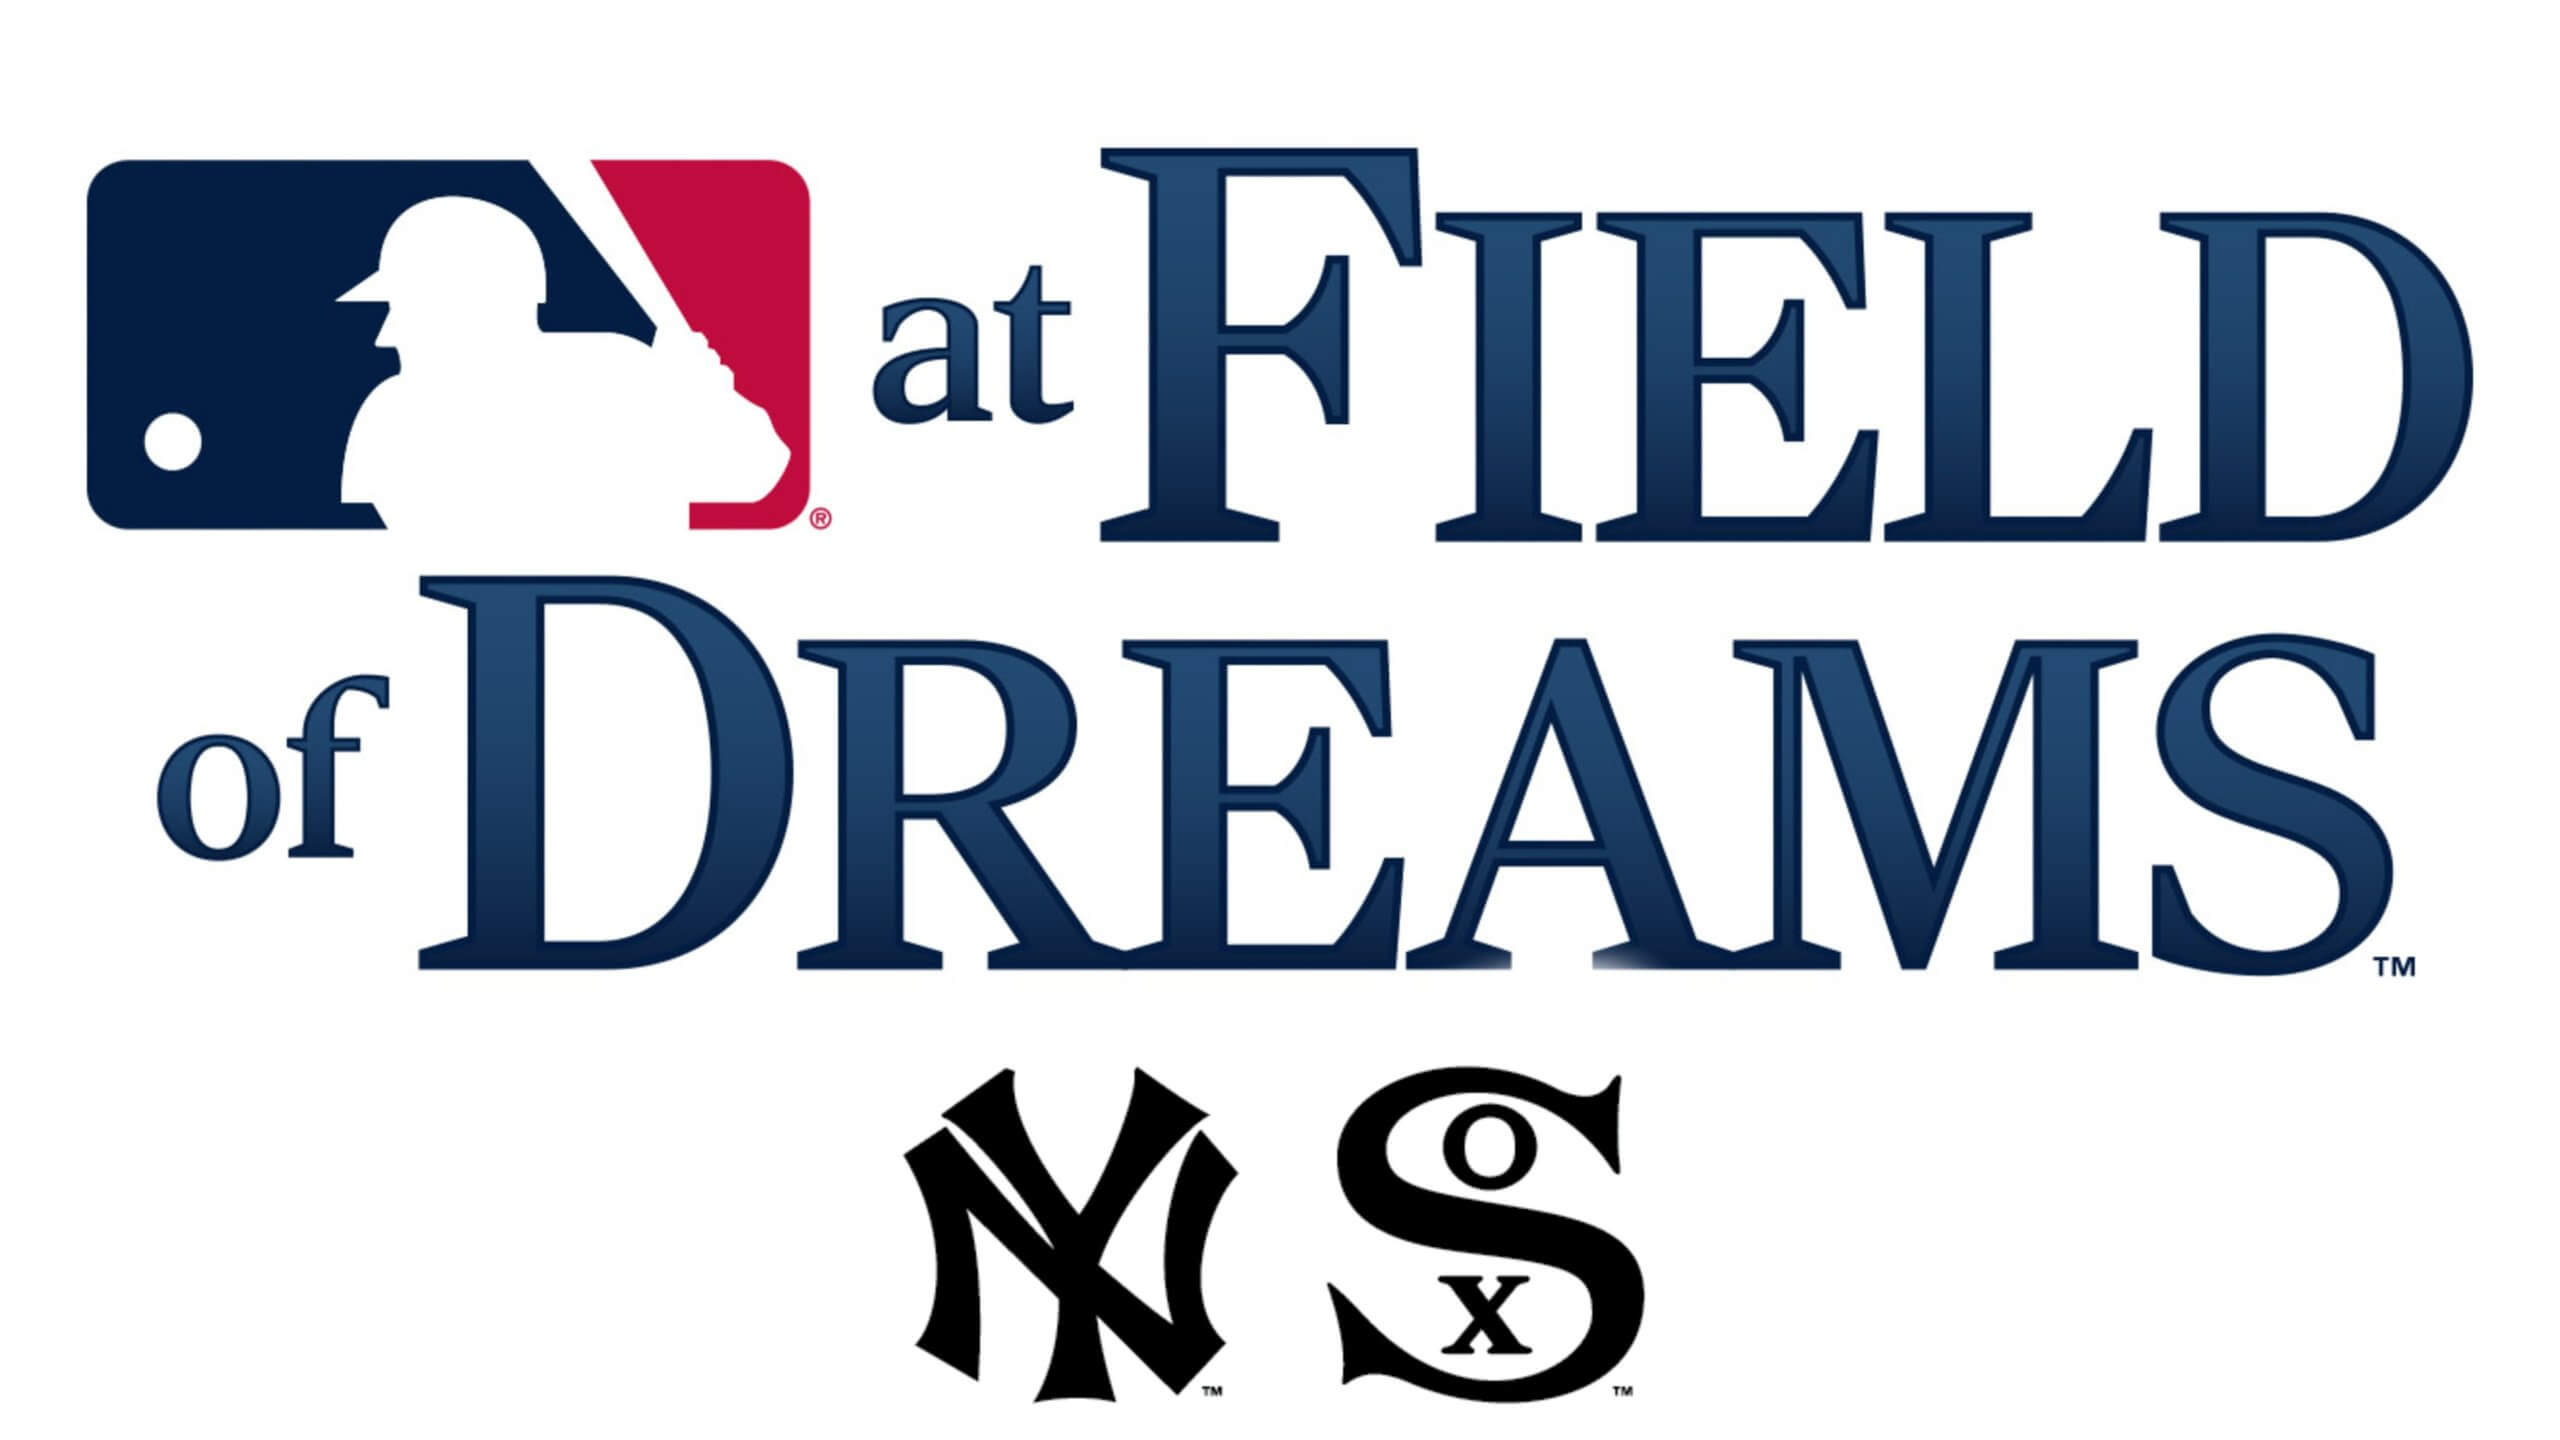 Field of Dreams game 2021: Where is the MLB game being played?